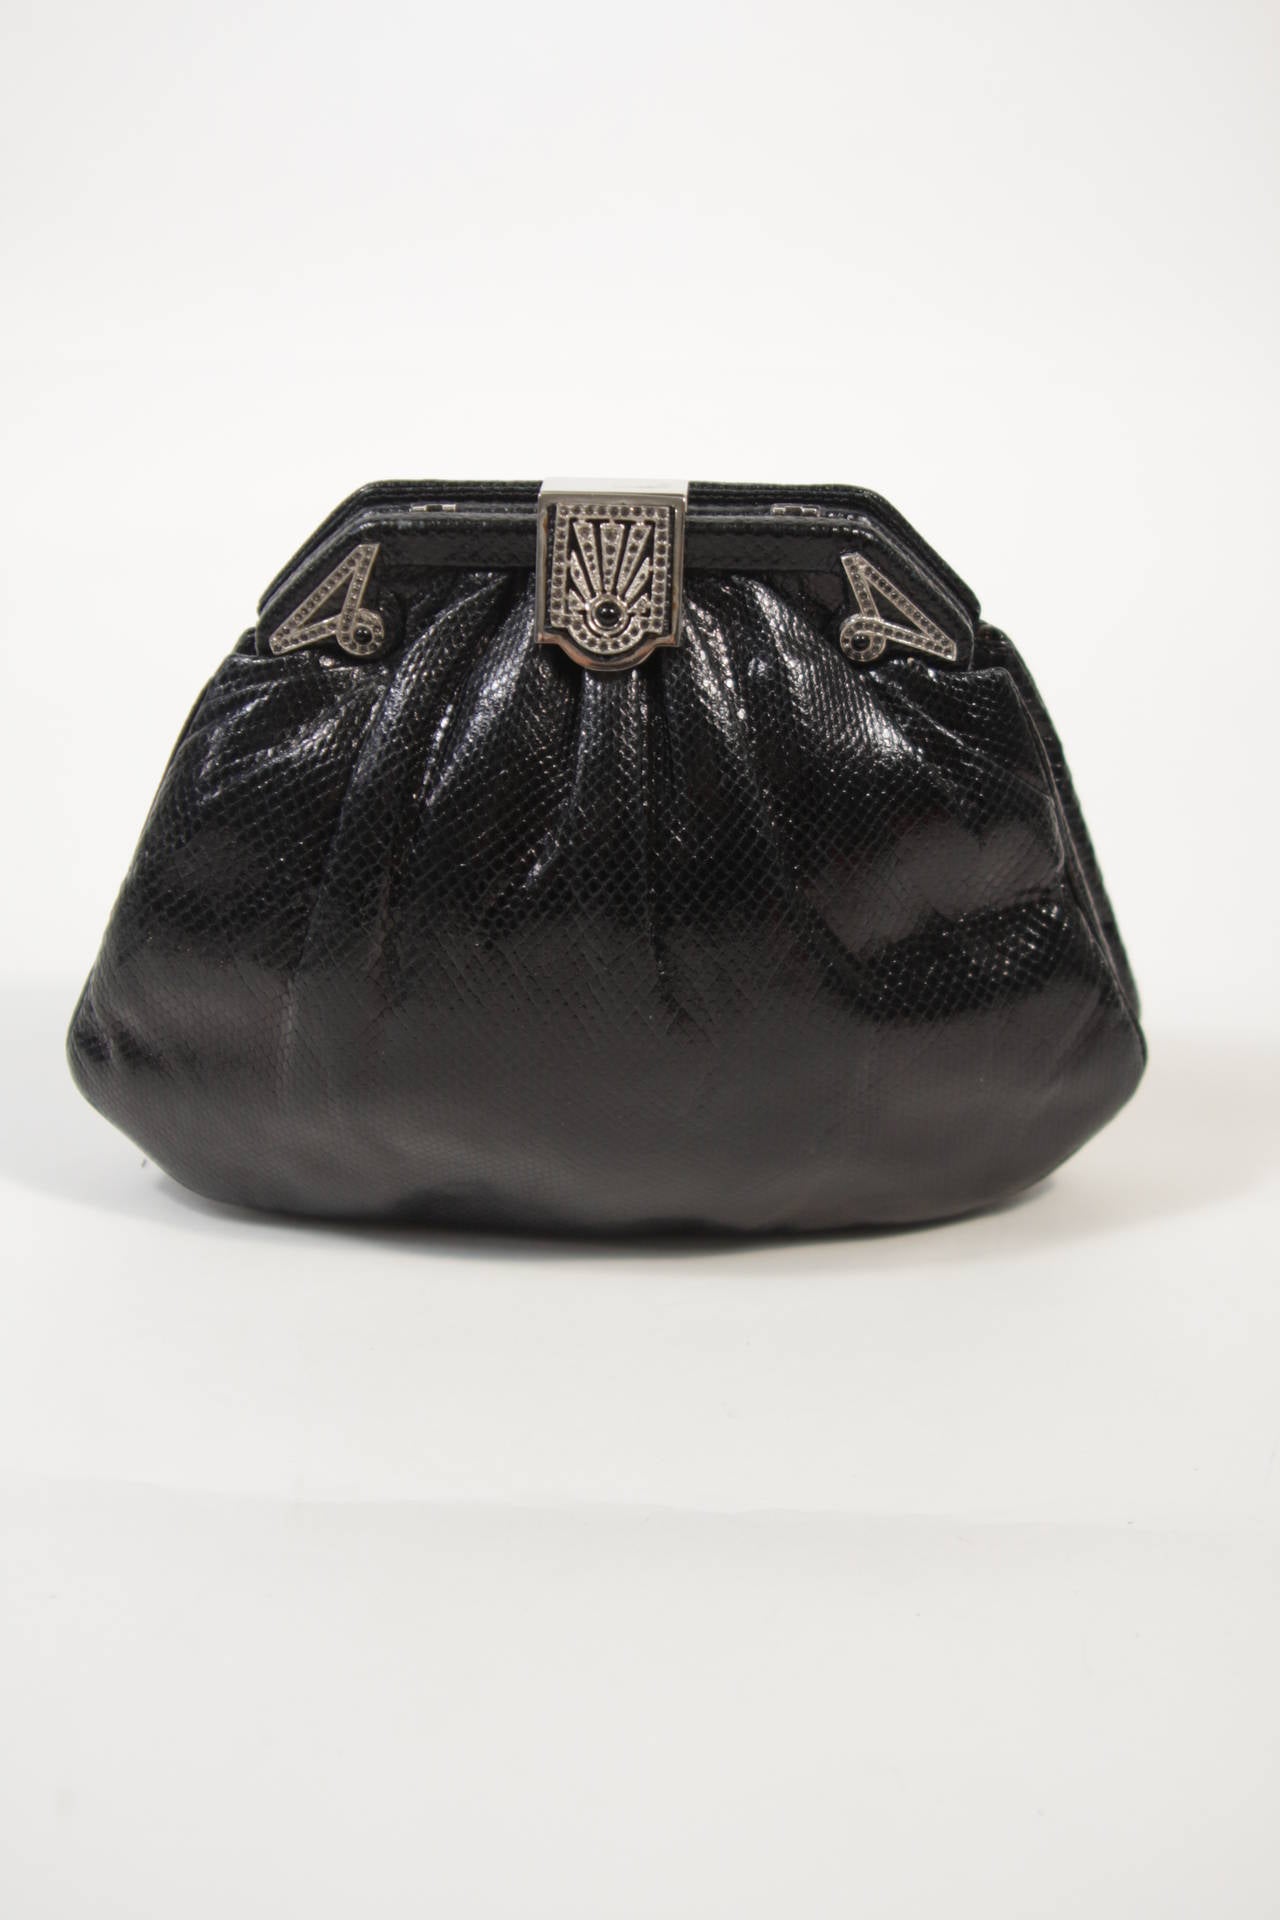 This vintage Judith Leiber handbag is composed of black lizard. The clasp closure is rhinestone encrusted. In excellent condition, sold 'as is'. Comes with original comb and dust bag. 

**Please cross-reference measurements for personal